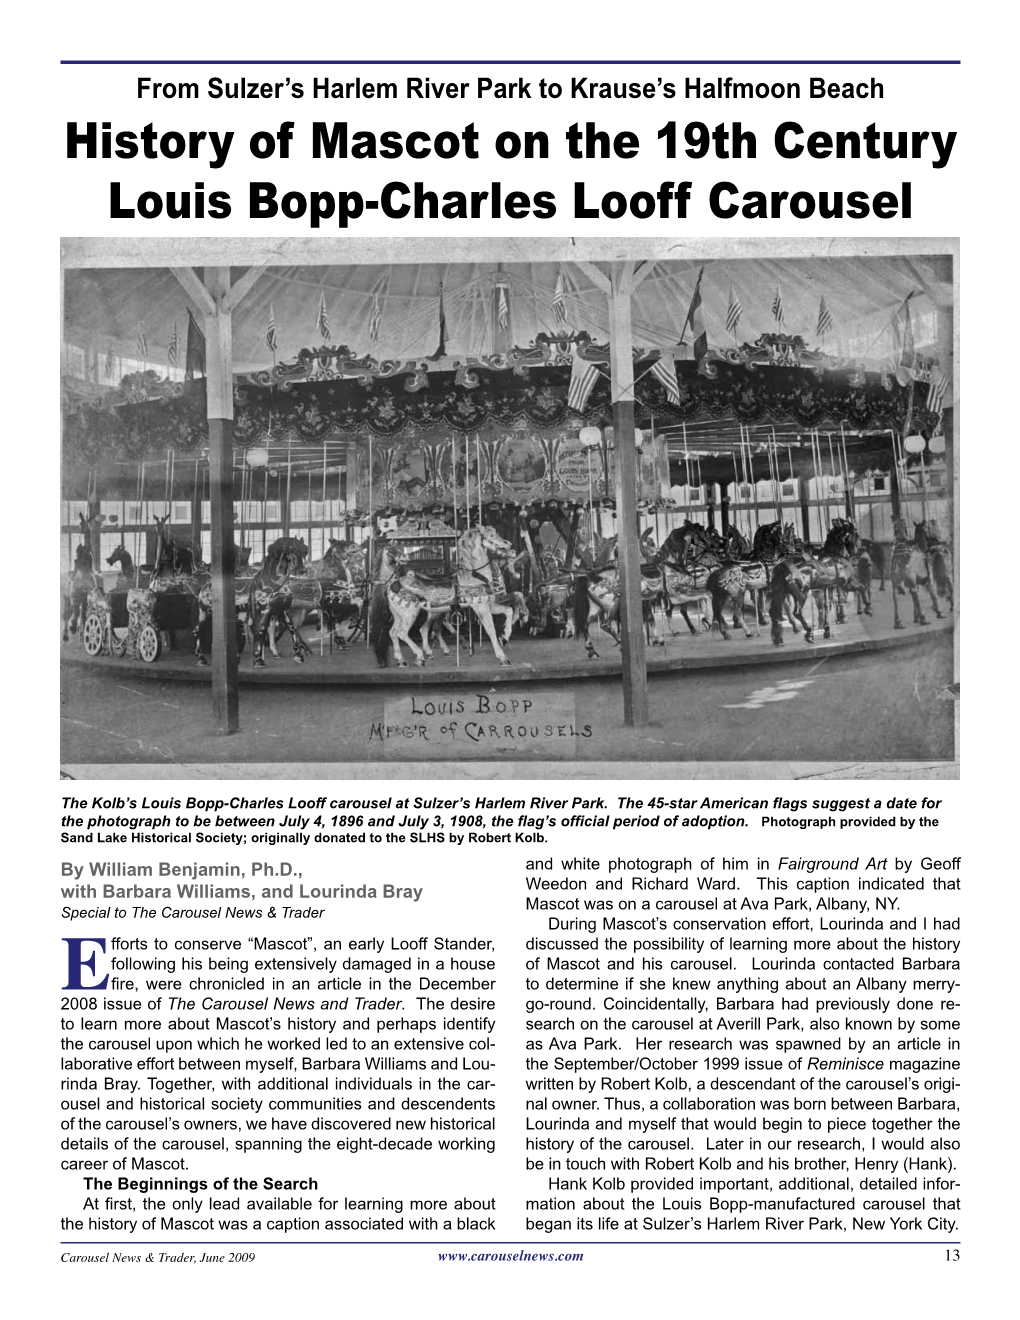 History of Mascot on the 19Th Century Louis Bopp-Charles Looff Carousel